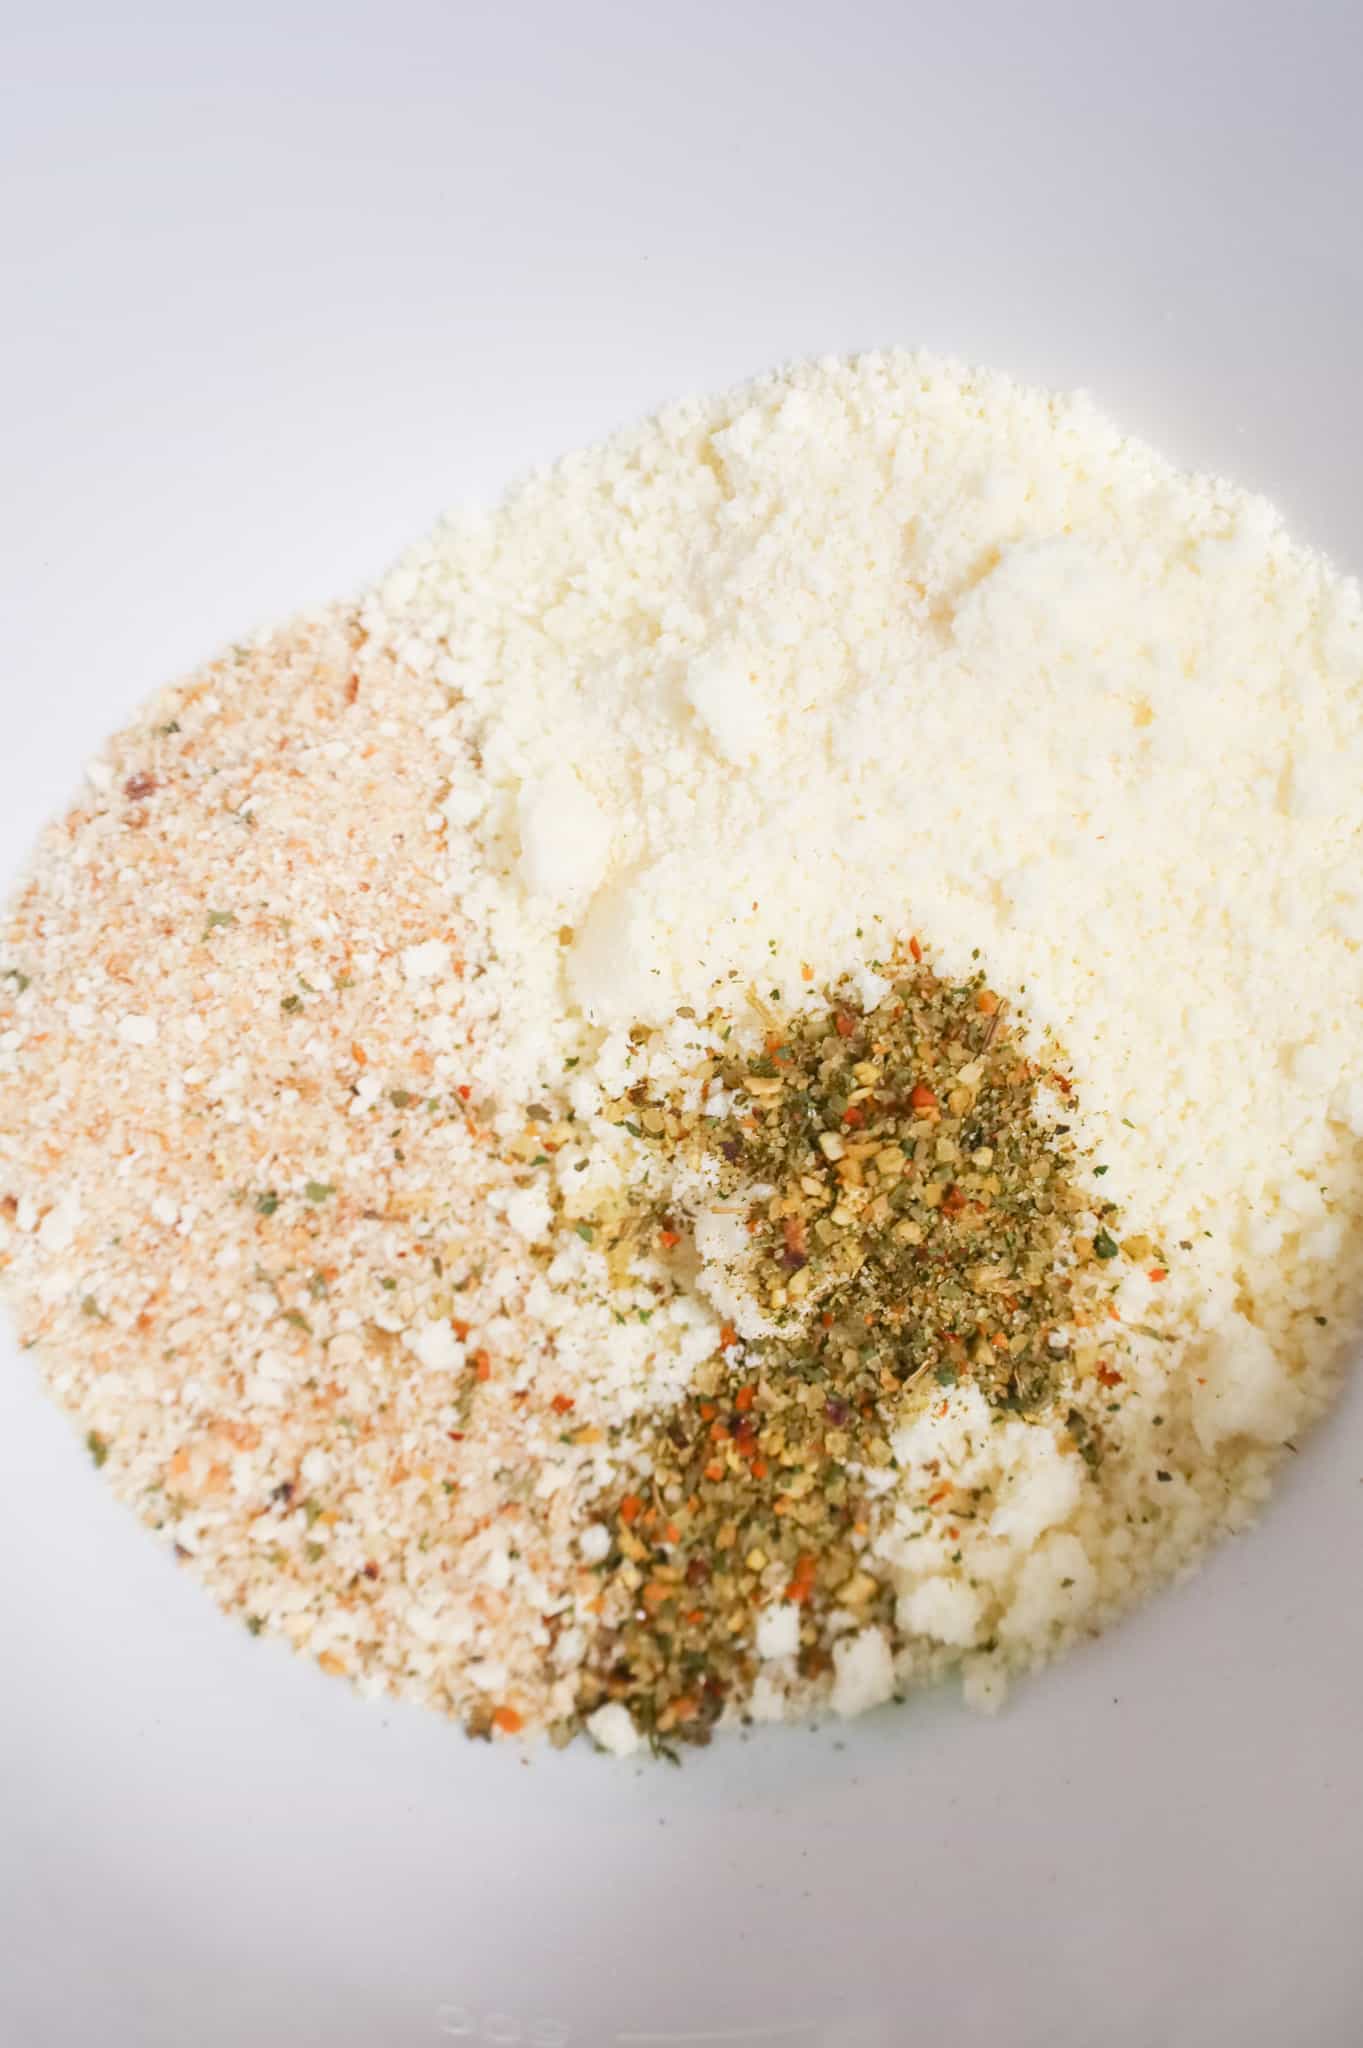 bread crumbs, grated parmesan and Italian seasoning in a mixing bowl